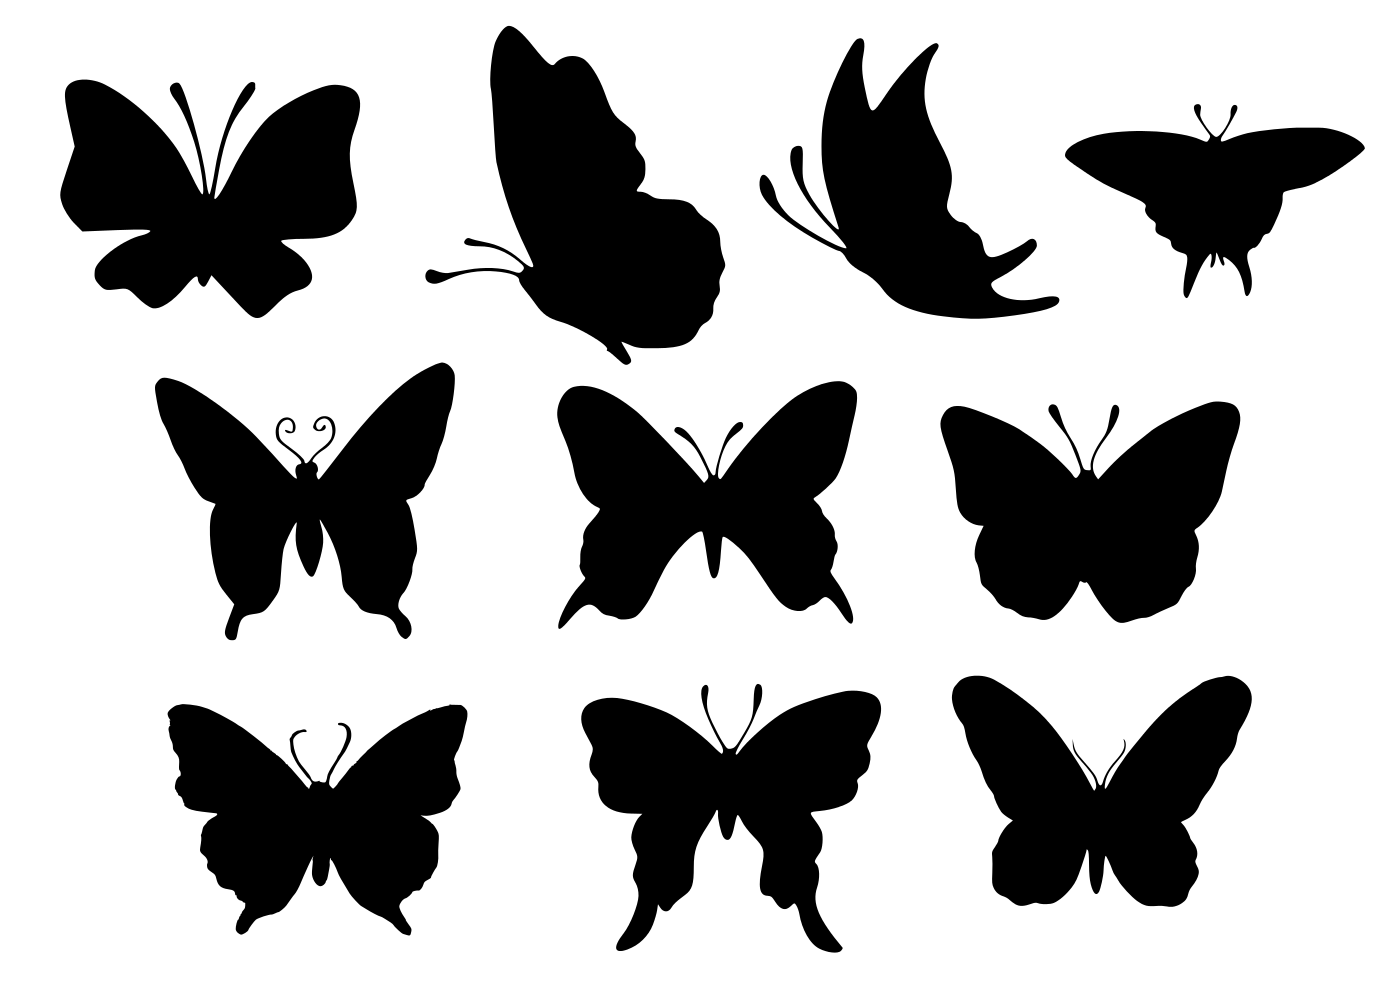 (butterfly-silhouette-1.png) Resolution: 750 × 694 px File format: PNG File...